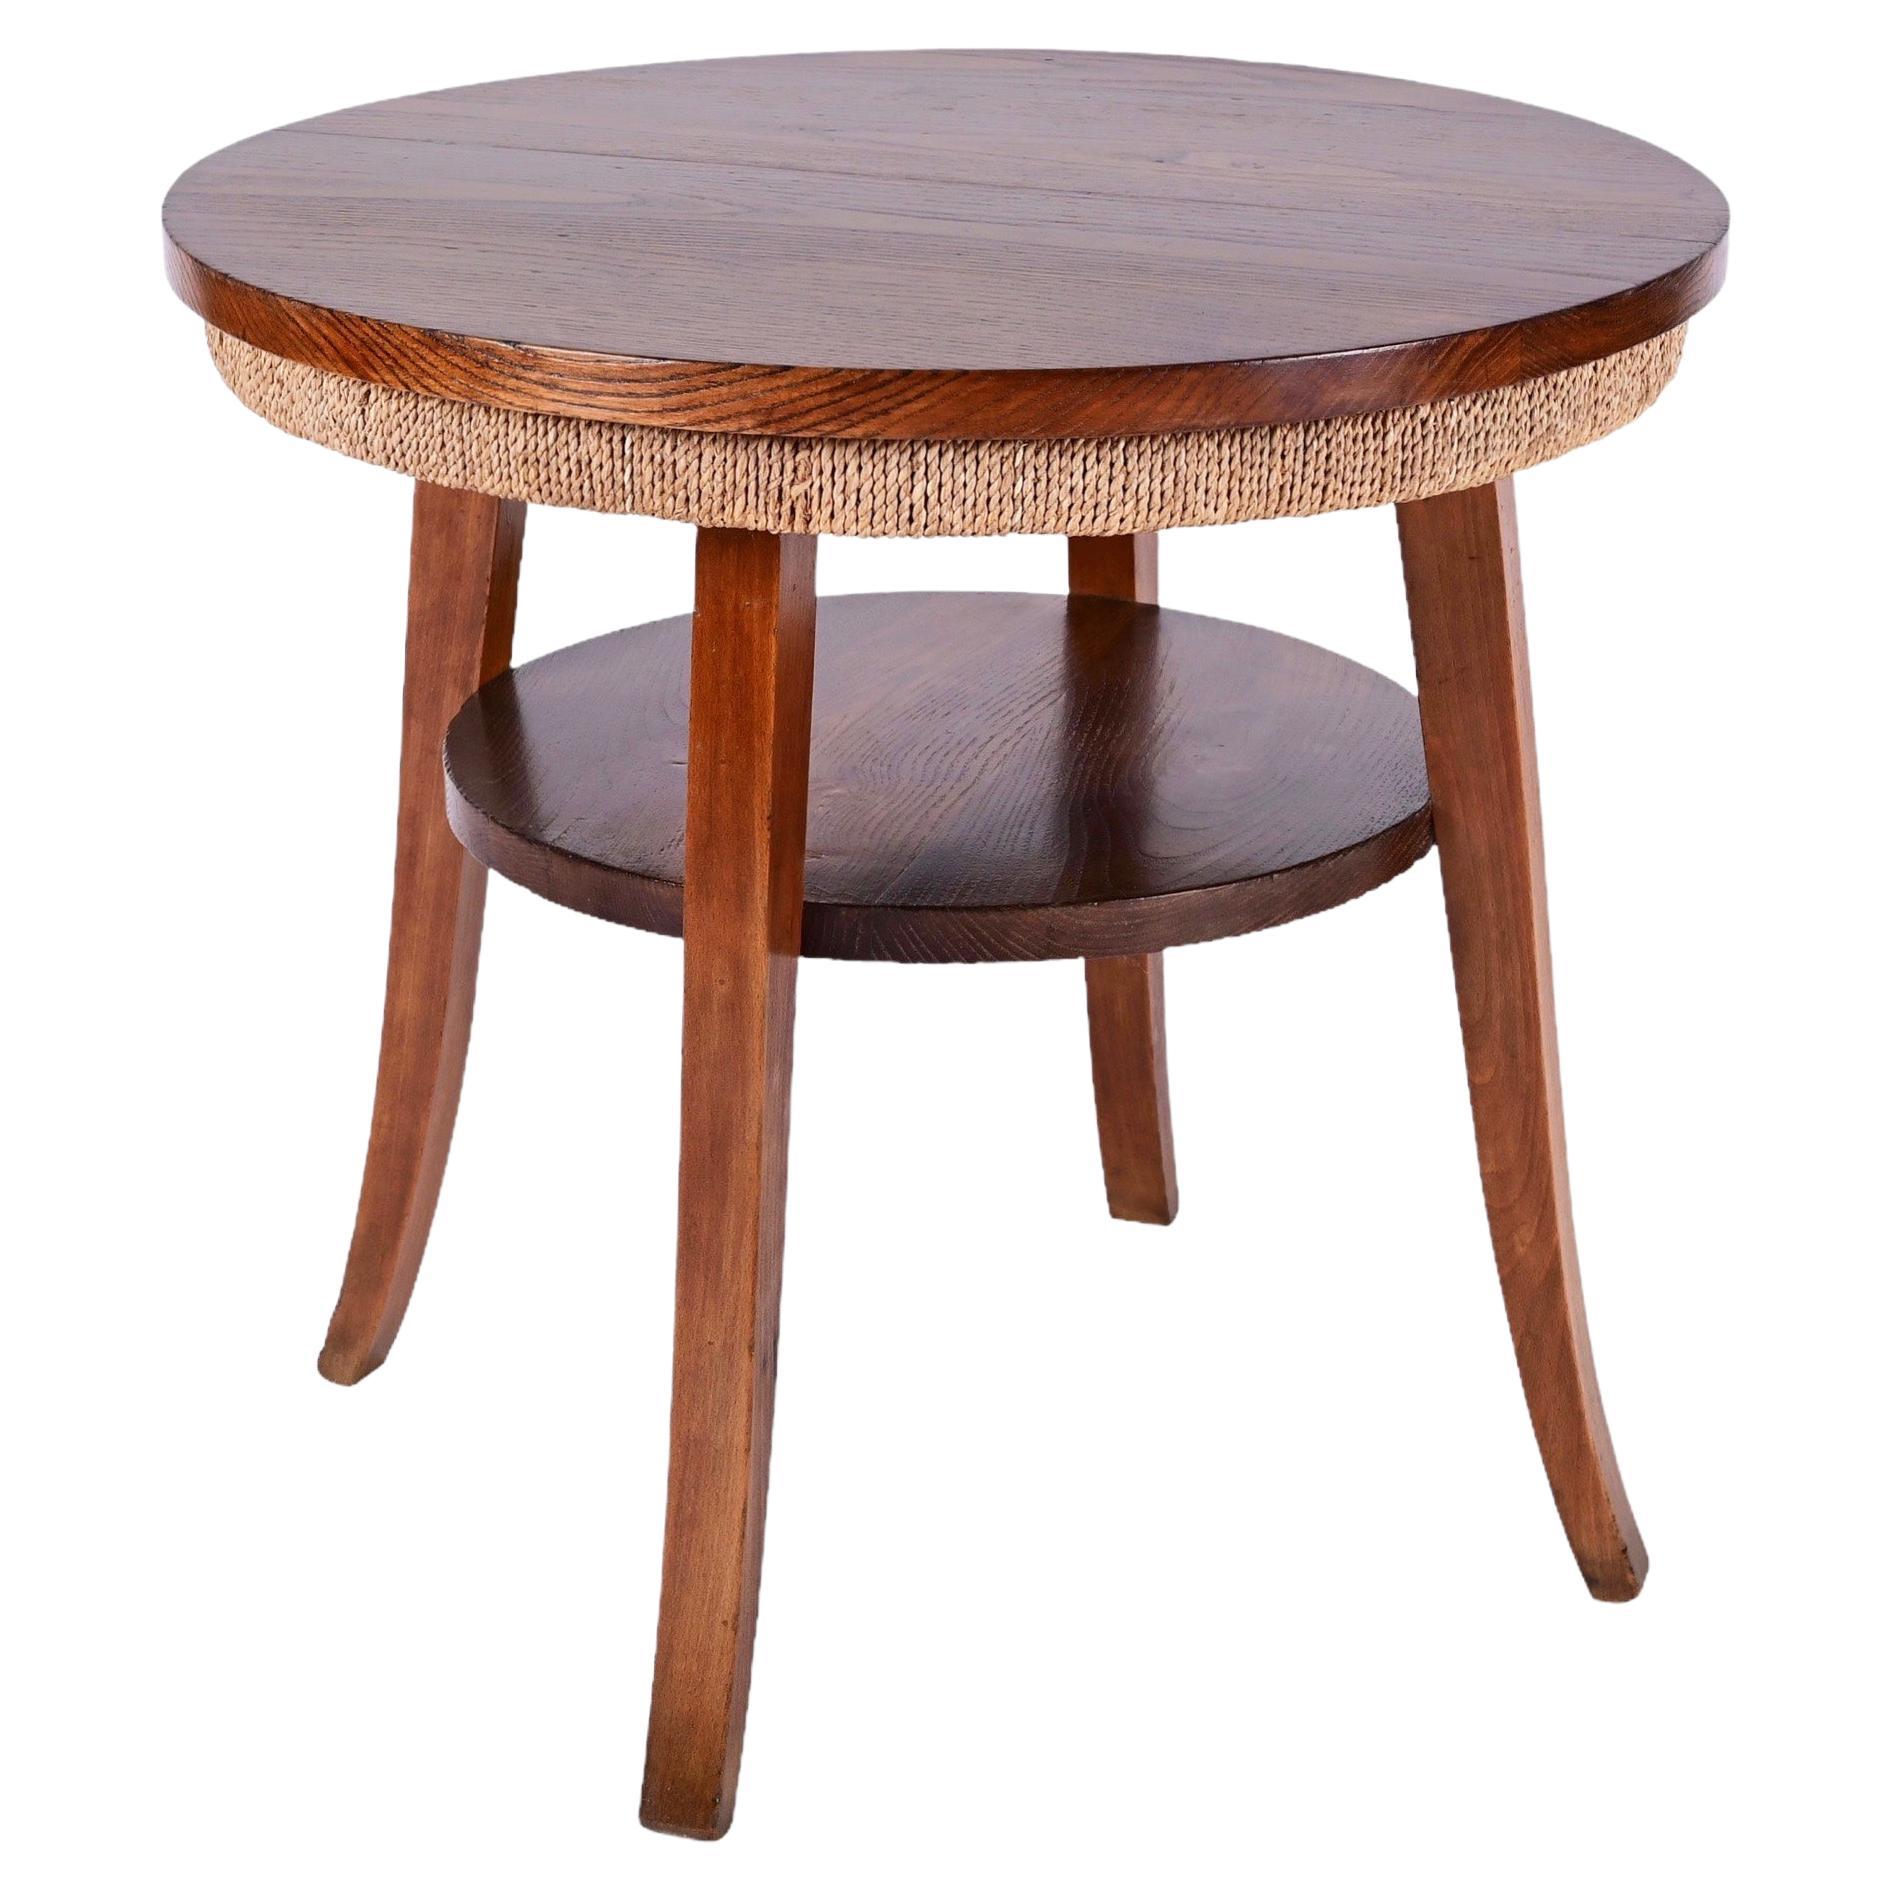 Midcentury Two-Tier Round Rope and Chestnut Wood Italian Coffee Table, 1950s For Sale